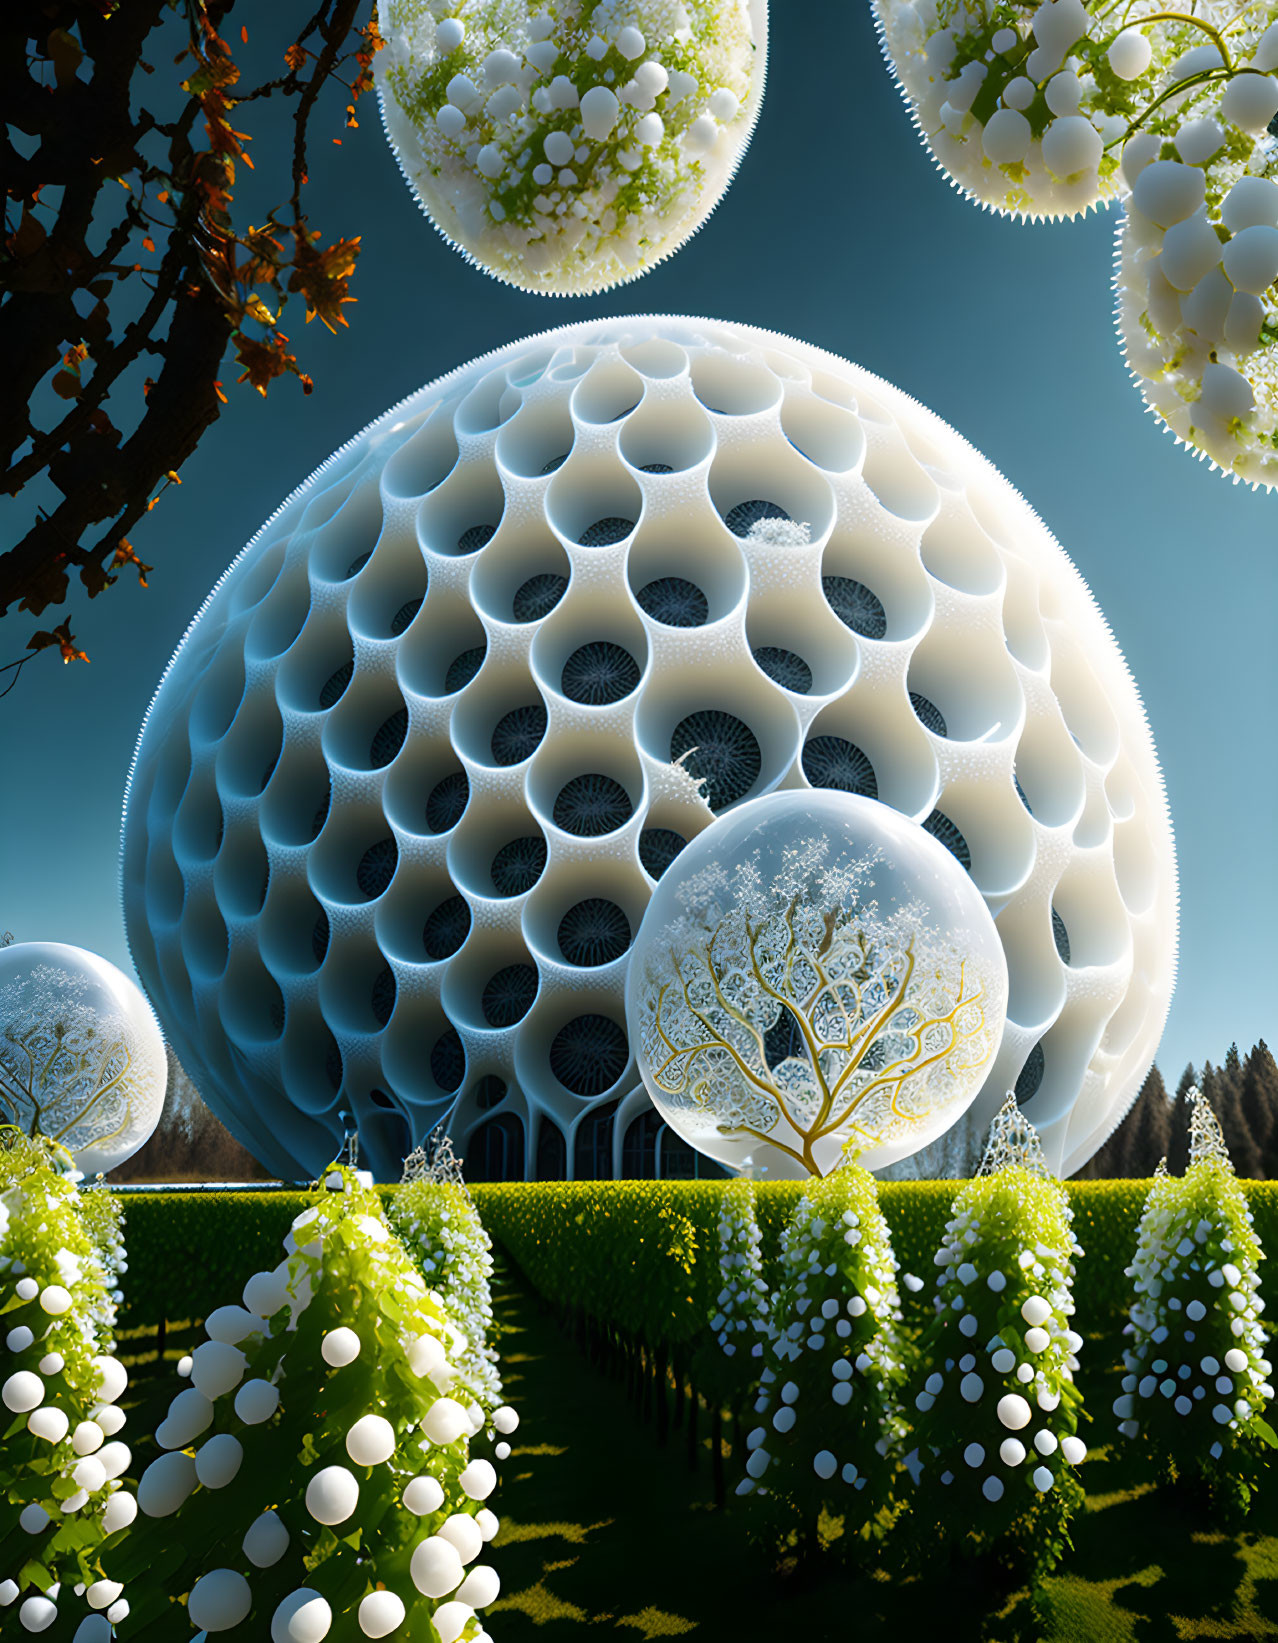 Surreal landscape with patterned spheres and tree motifs in vibrant green setting